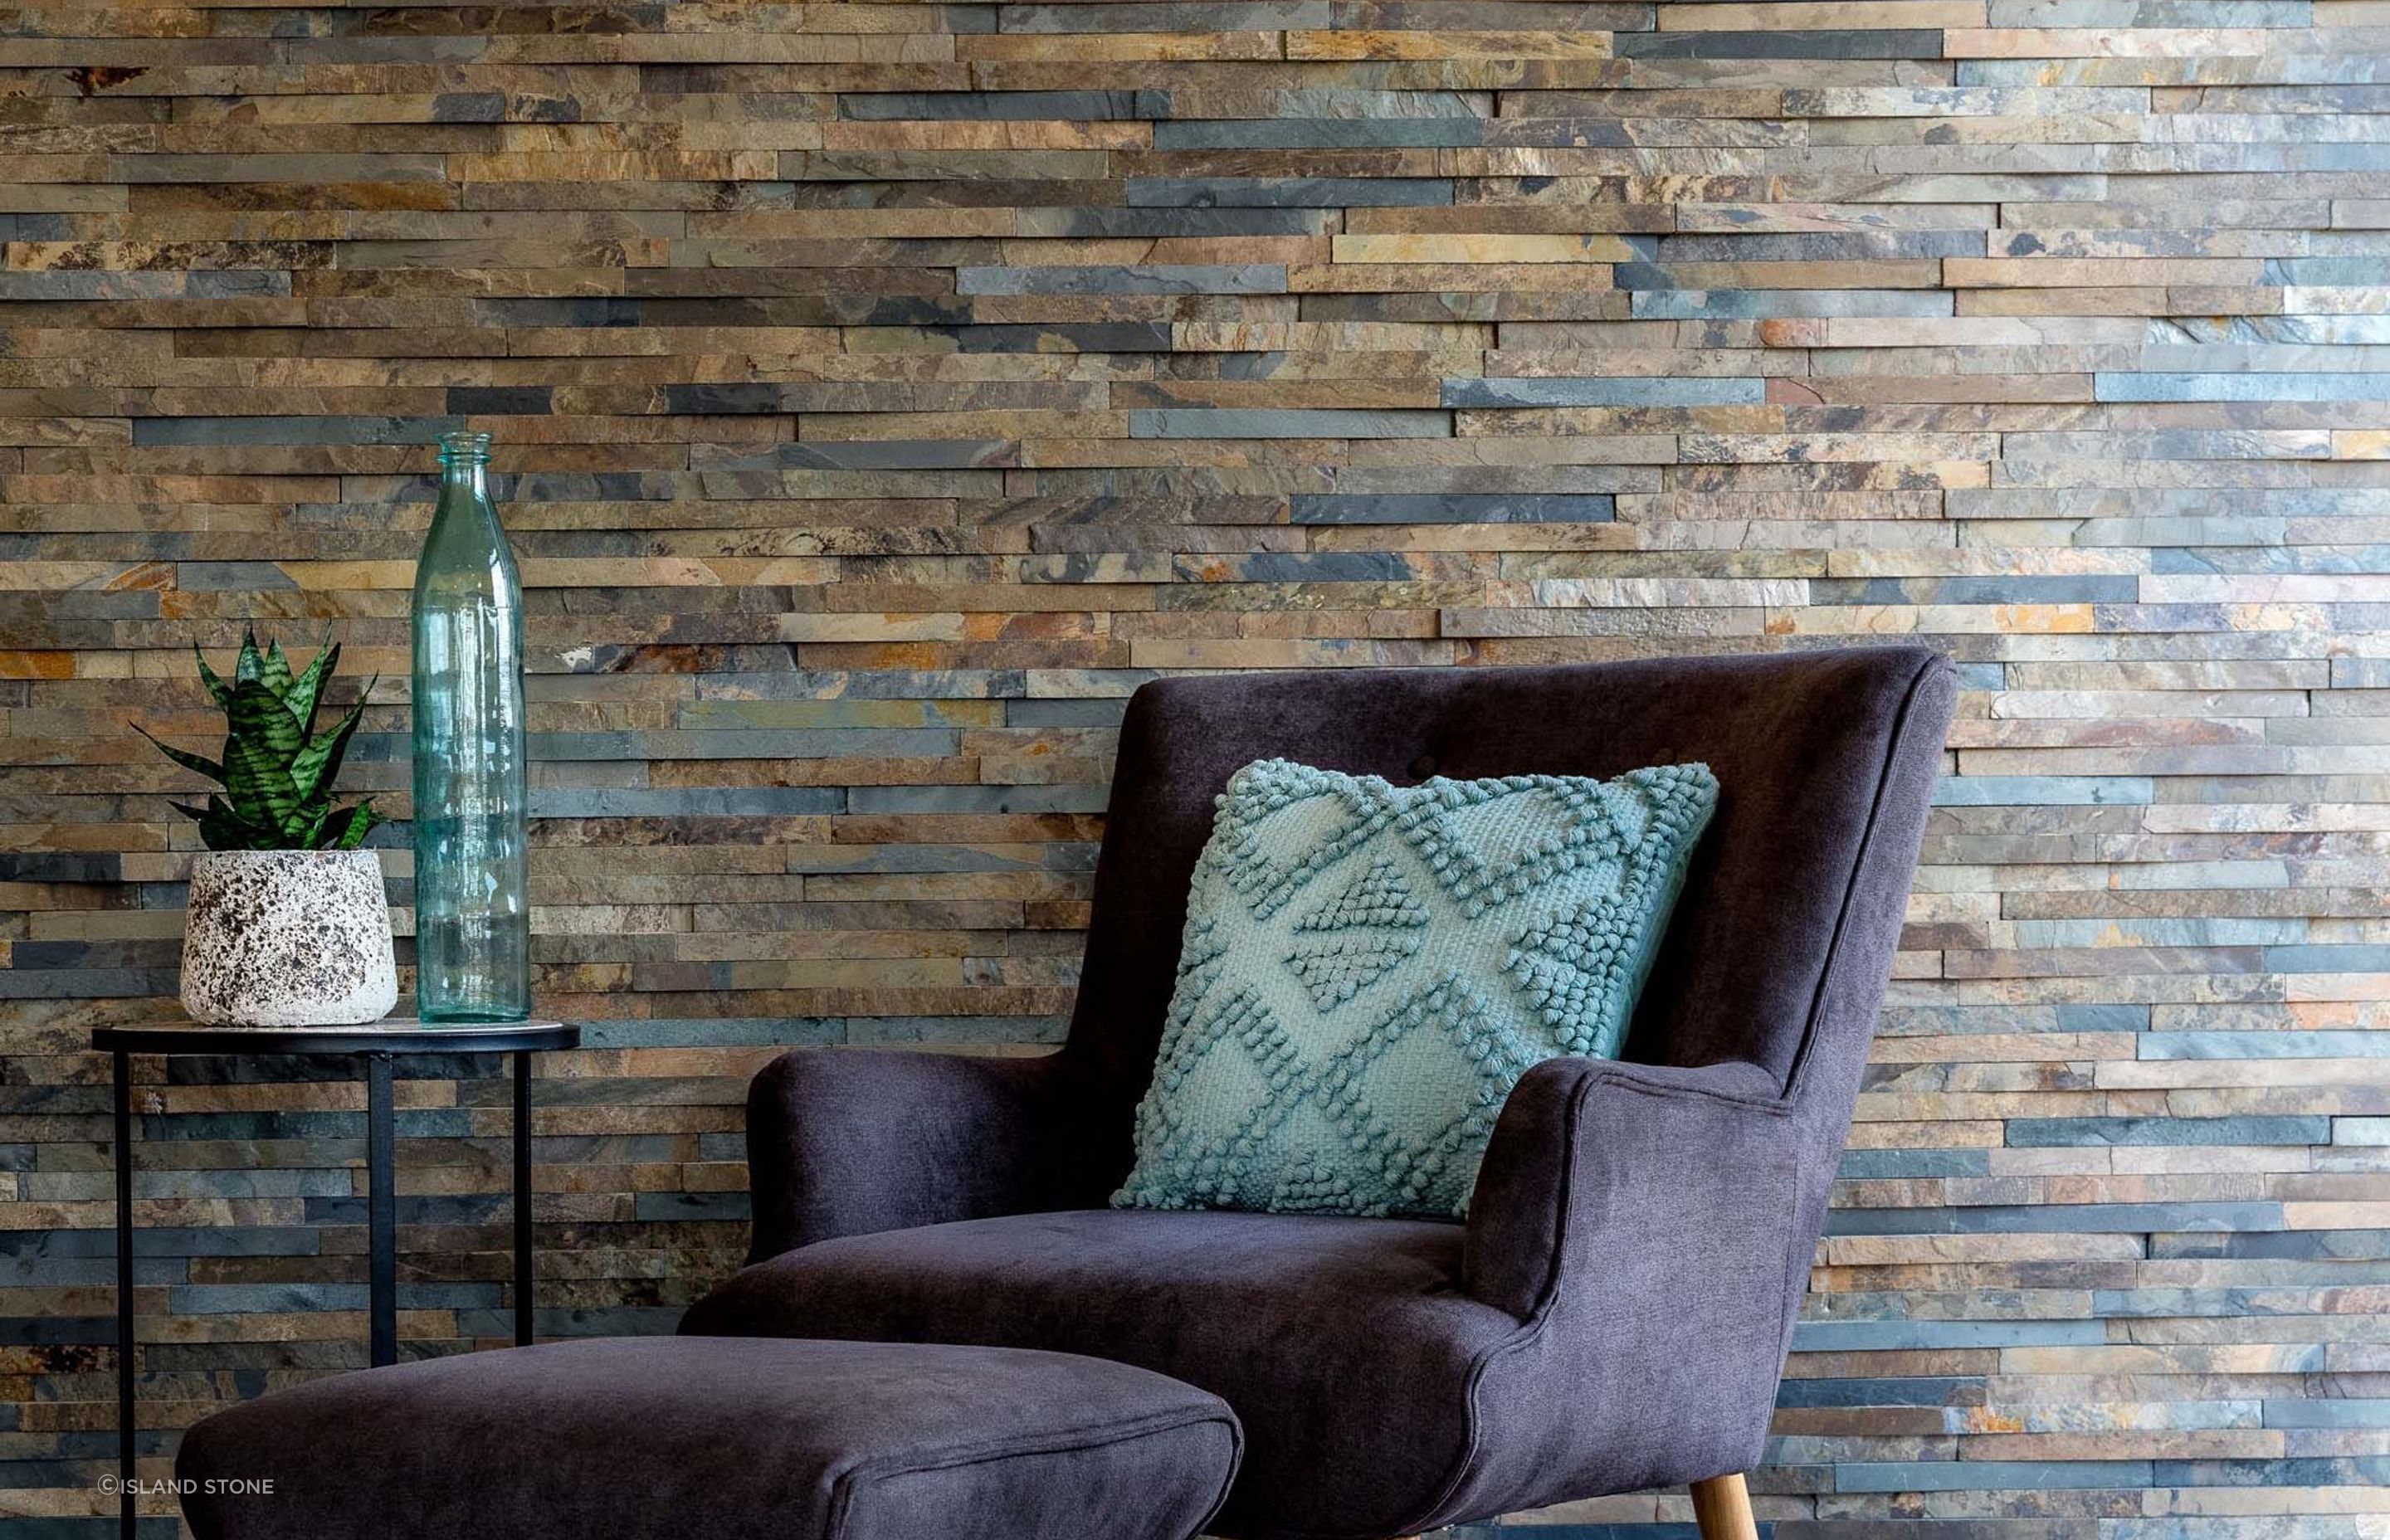 Narrow pieces of wedge-shaped stone are mesh-backed in an offset wave pattern for a great aesthetic with Rustic Cladding.